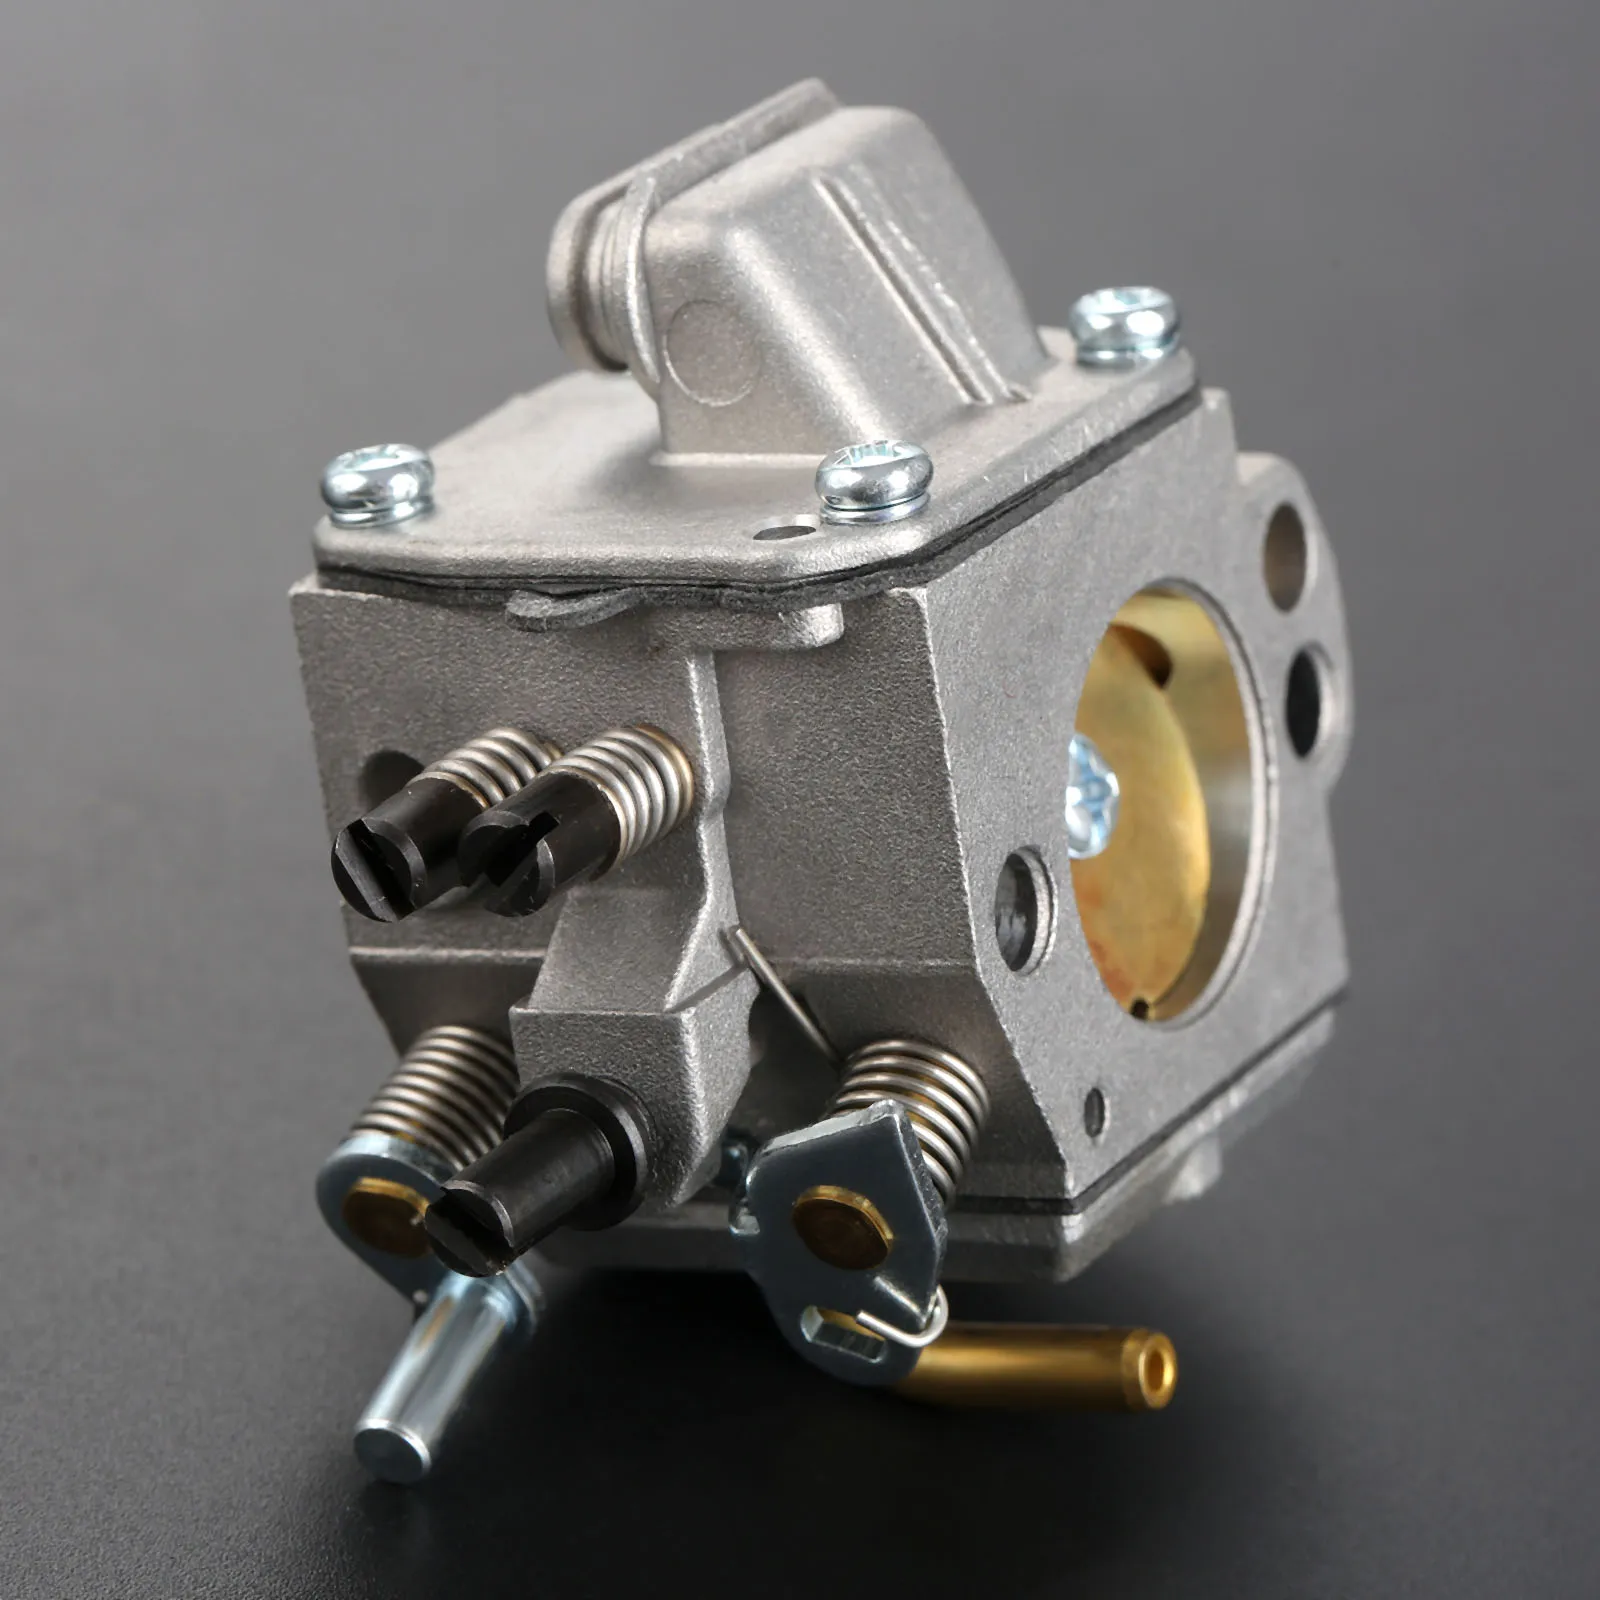 

1PC ms290 Carburetor Carb fit For STIHL 029 039 MS290 MS310 MS390 MS 290 310 390 Chainsaw Spare Parts Replace# 1127 120 0650